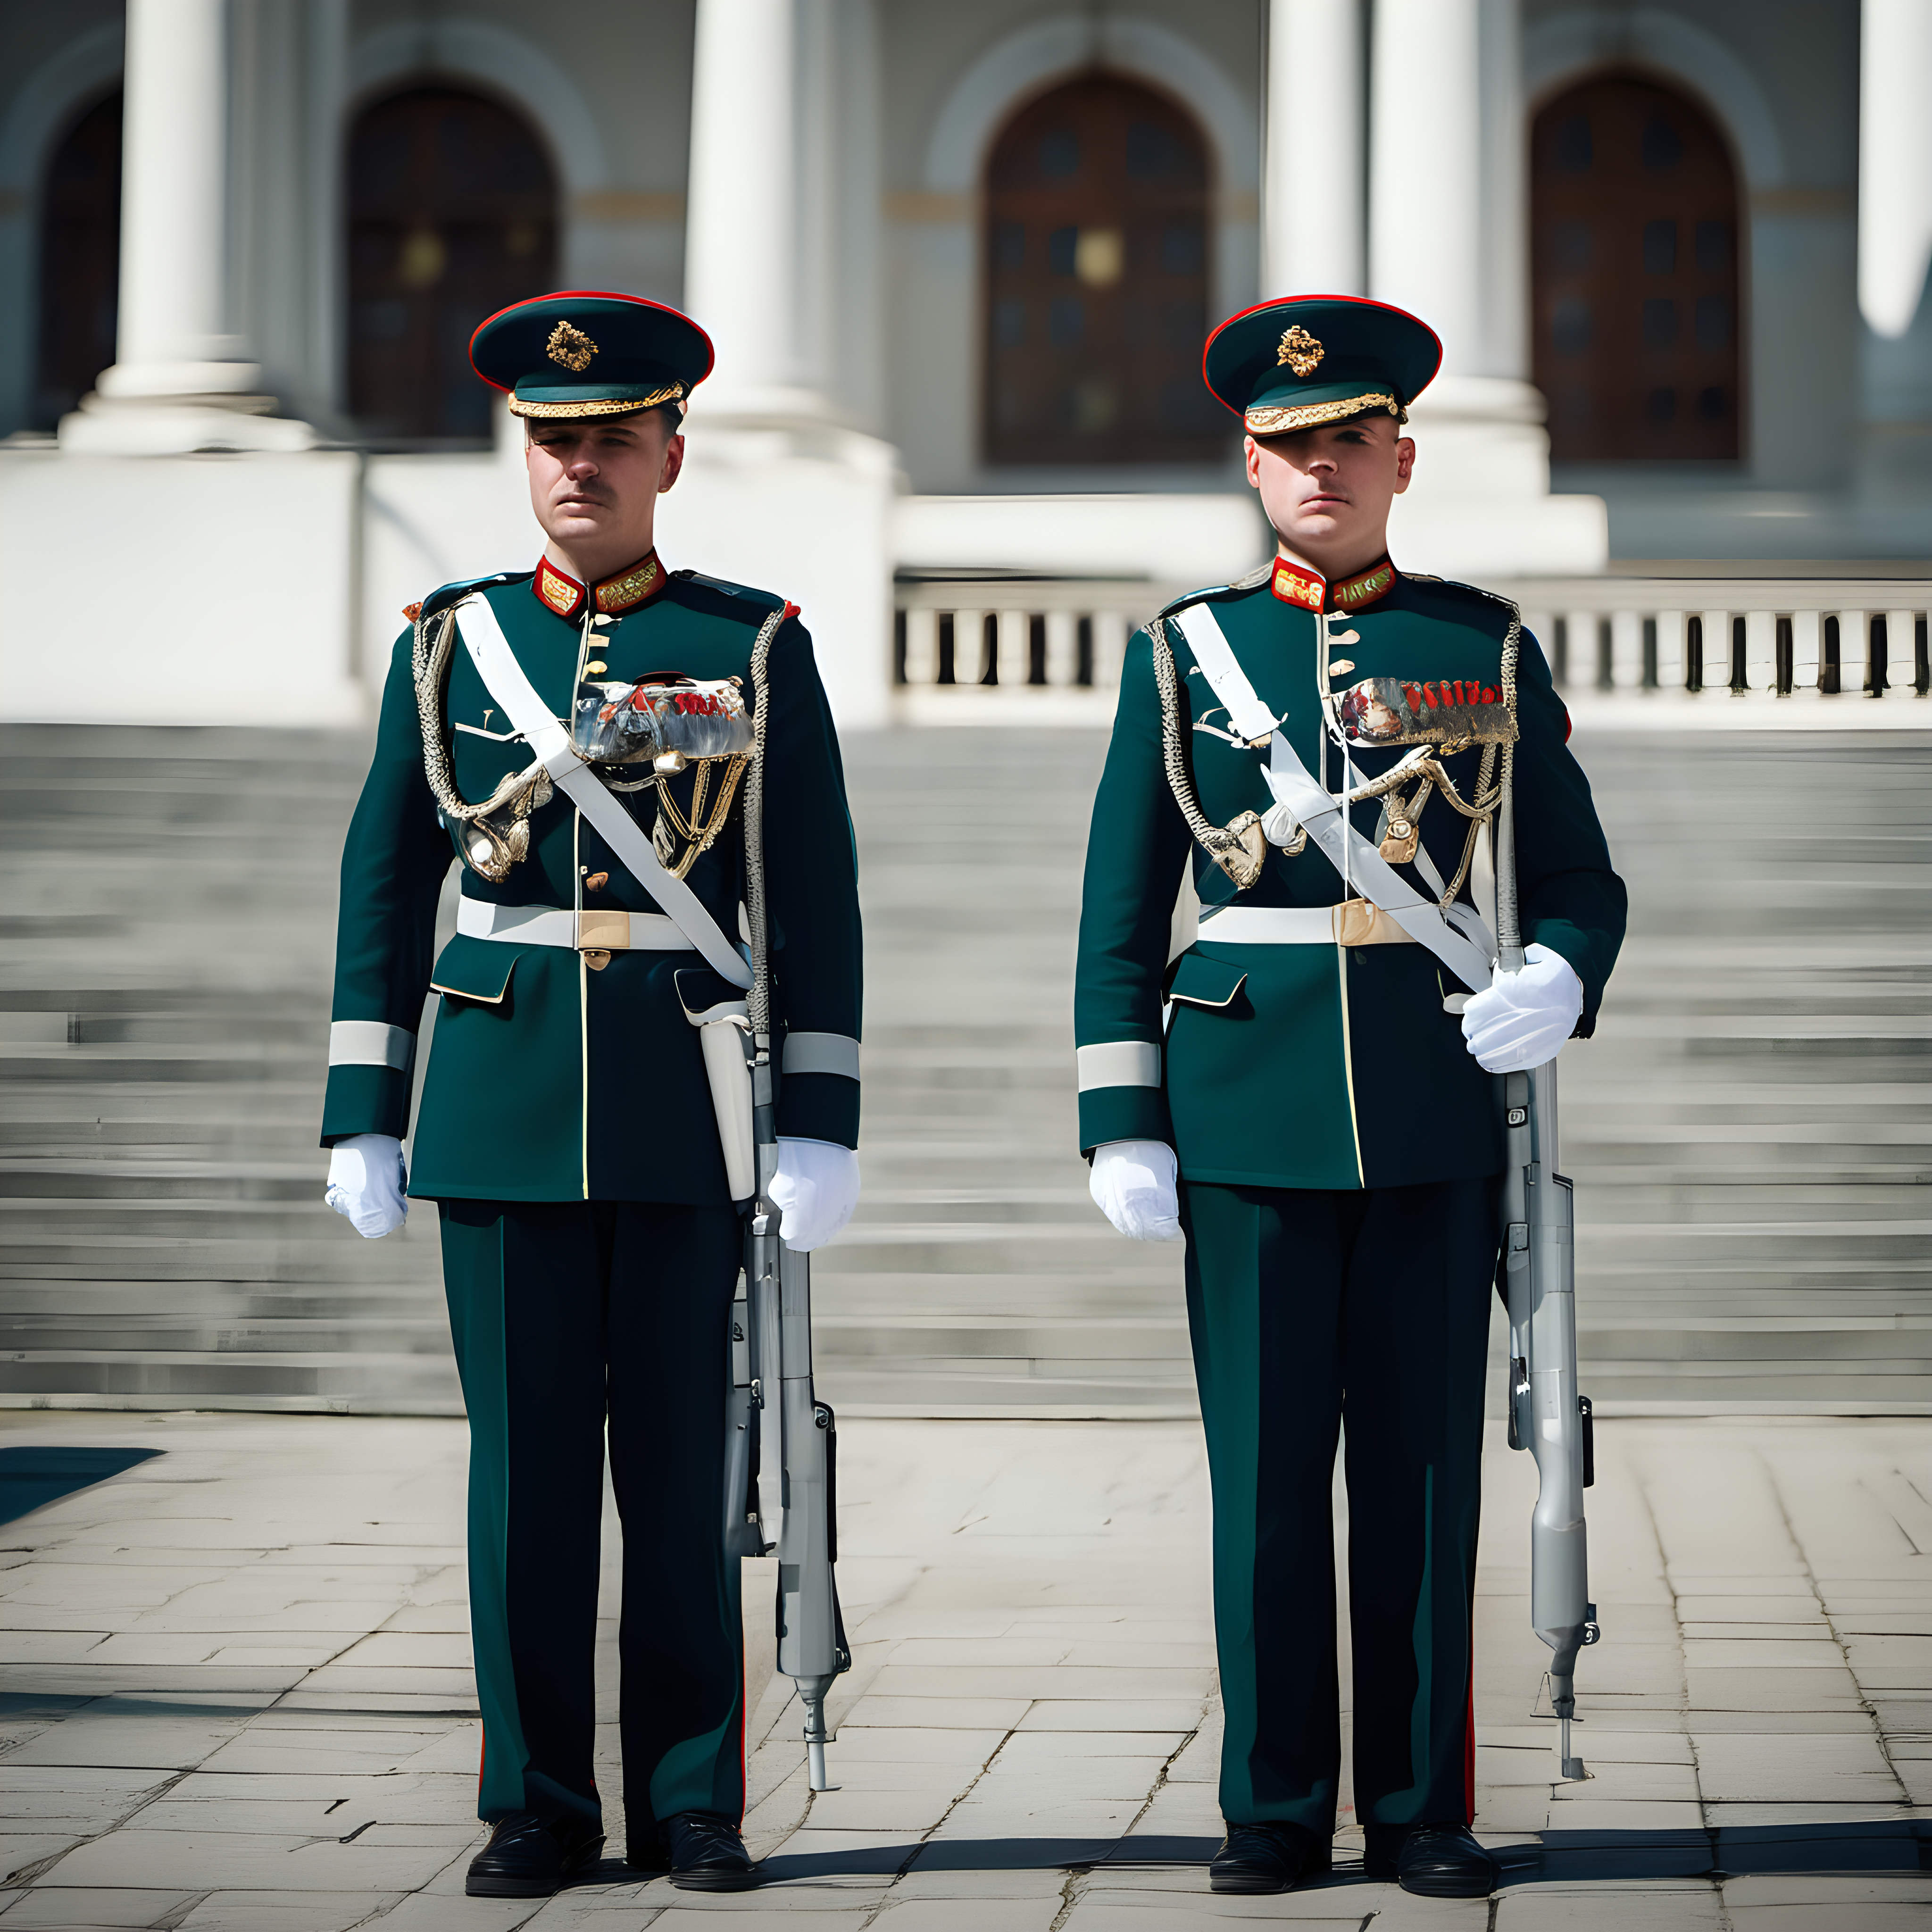 Two Russian armed guards, dressed in military uniforms. Stoic, Vigilant, Commanding, Regimented, Patriotic. Professional DSLR camera. Telephoto lens for capturing details from a distance. Mid-morning, with clear sunlight casting defined shadows and highlighting the uniforms and architectural details. Focus on the disciplined and stoic demeanor of the armed guards as they stand at attention. Capture their uniforms, posture, and the sense of authority. Digital capture with high resolution to showcase the details and sharpness of the uniforms. Use post-processing to enhance the colors and emphasize the seriousness and pride of the guards in their duty.





